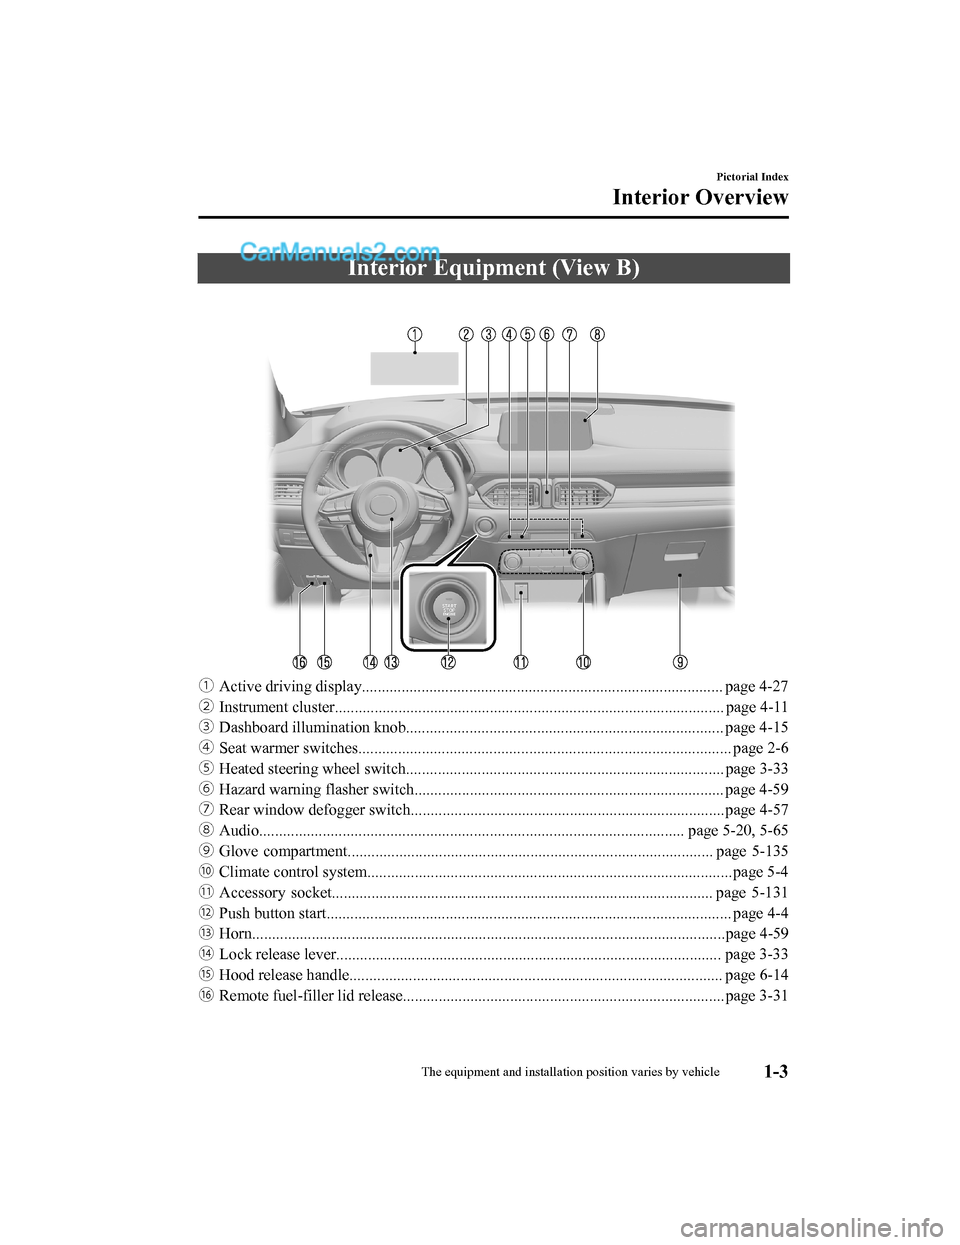 MAZDA MODEL CX-5 2018  Owners Manual (in English) Interior Equipment (View B)
ƒActive driving display........................................................................................... page 4-27
„ Instrument cluster......................